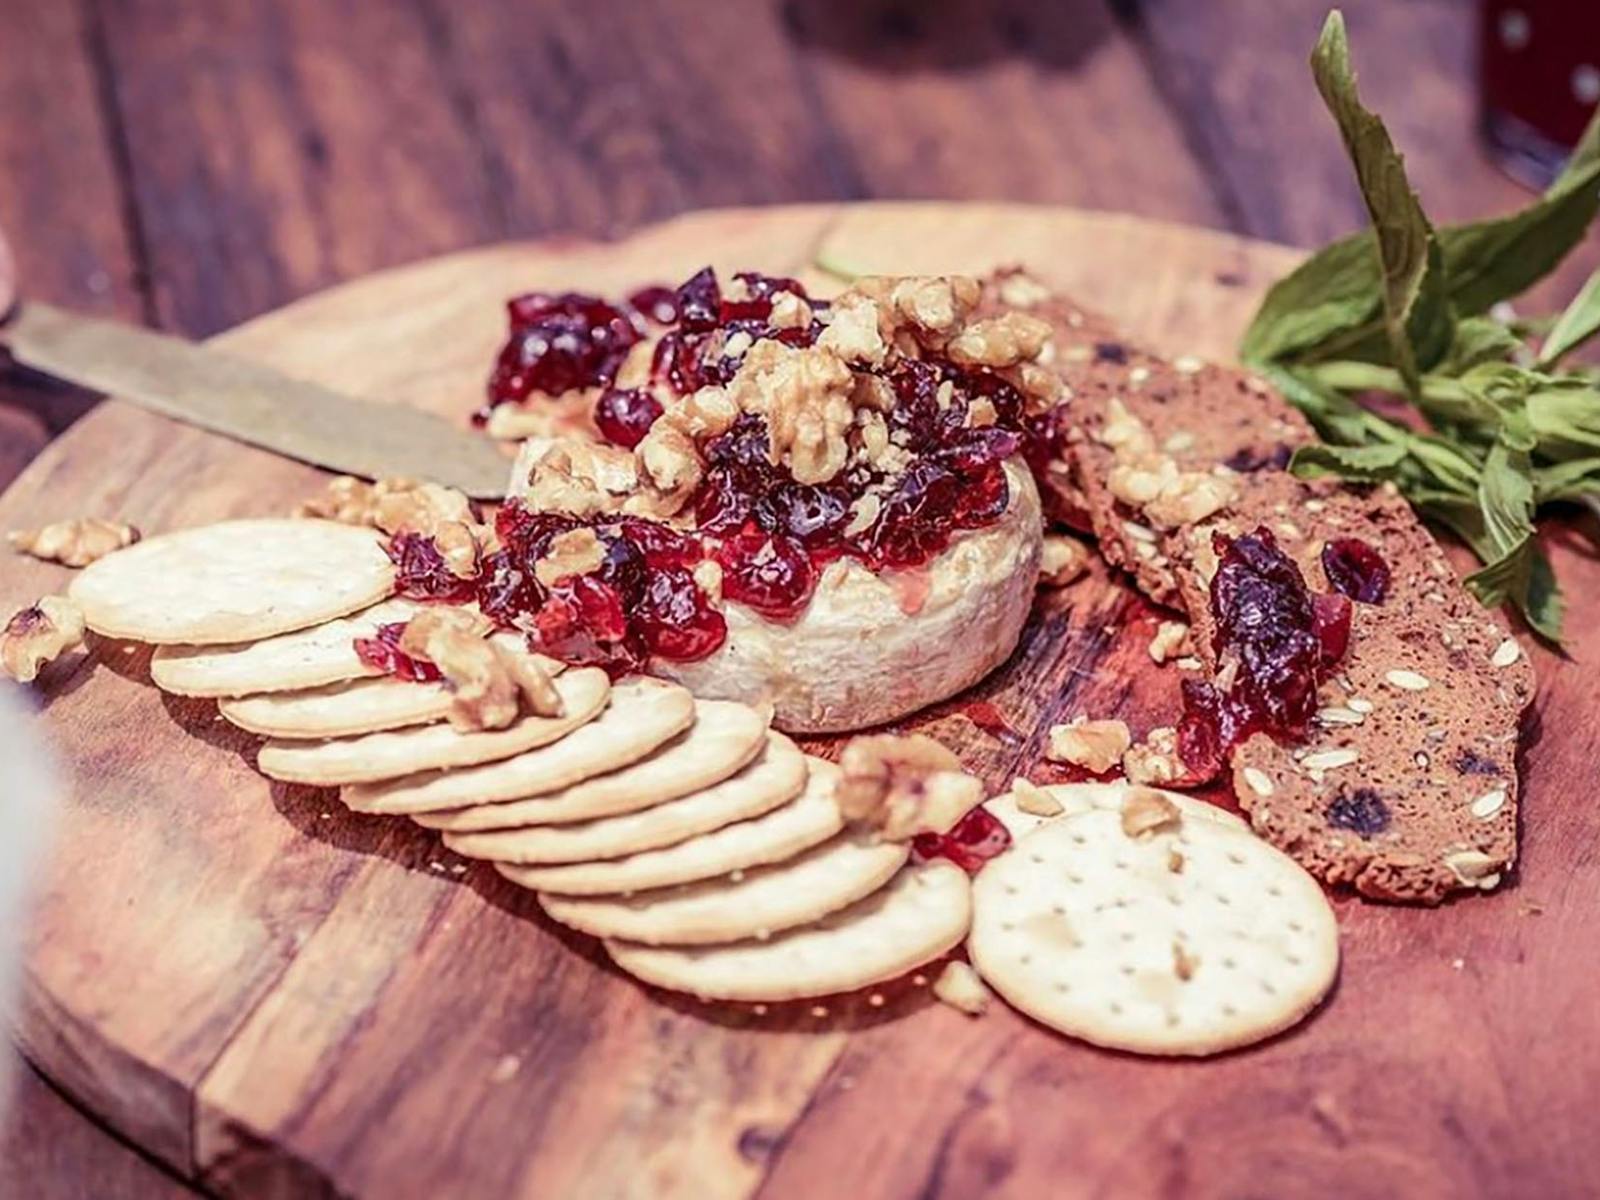 Our baked brie is a crowd favourite